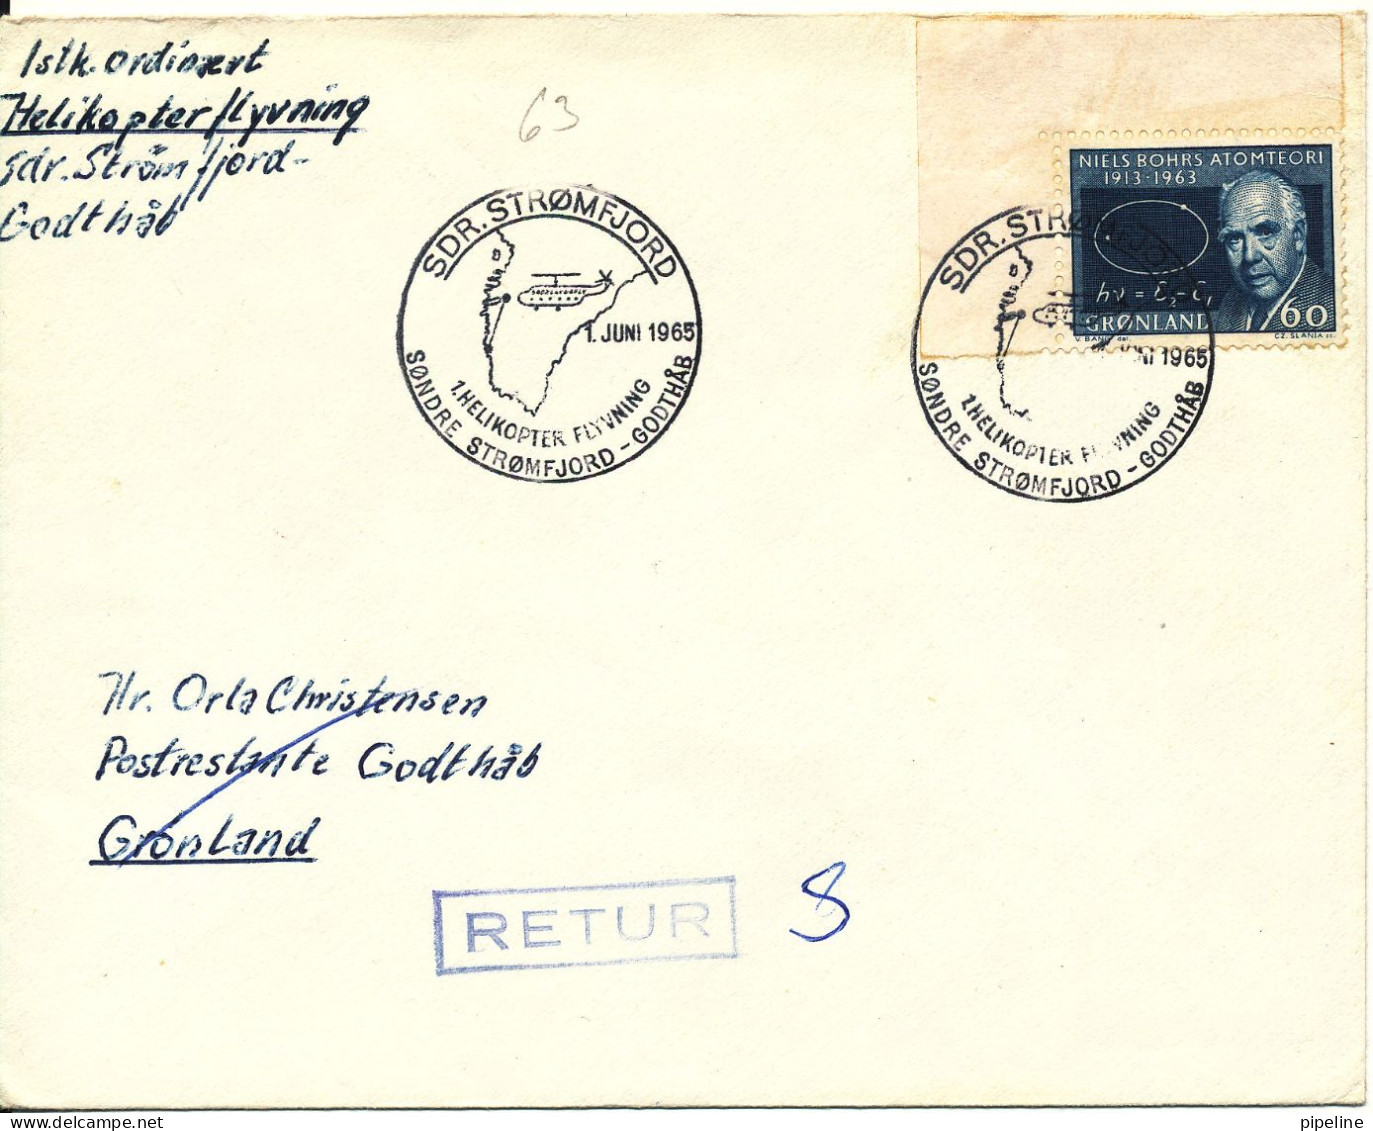 Greenland Cover First Helicopter Flight Sdr. Strömfjord - Godthab 1-6-1965 - Covers & Documents